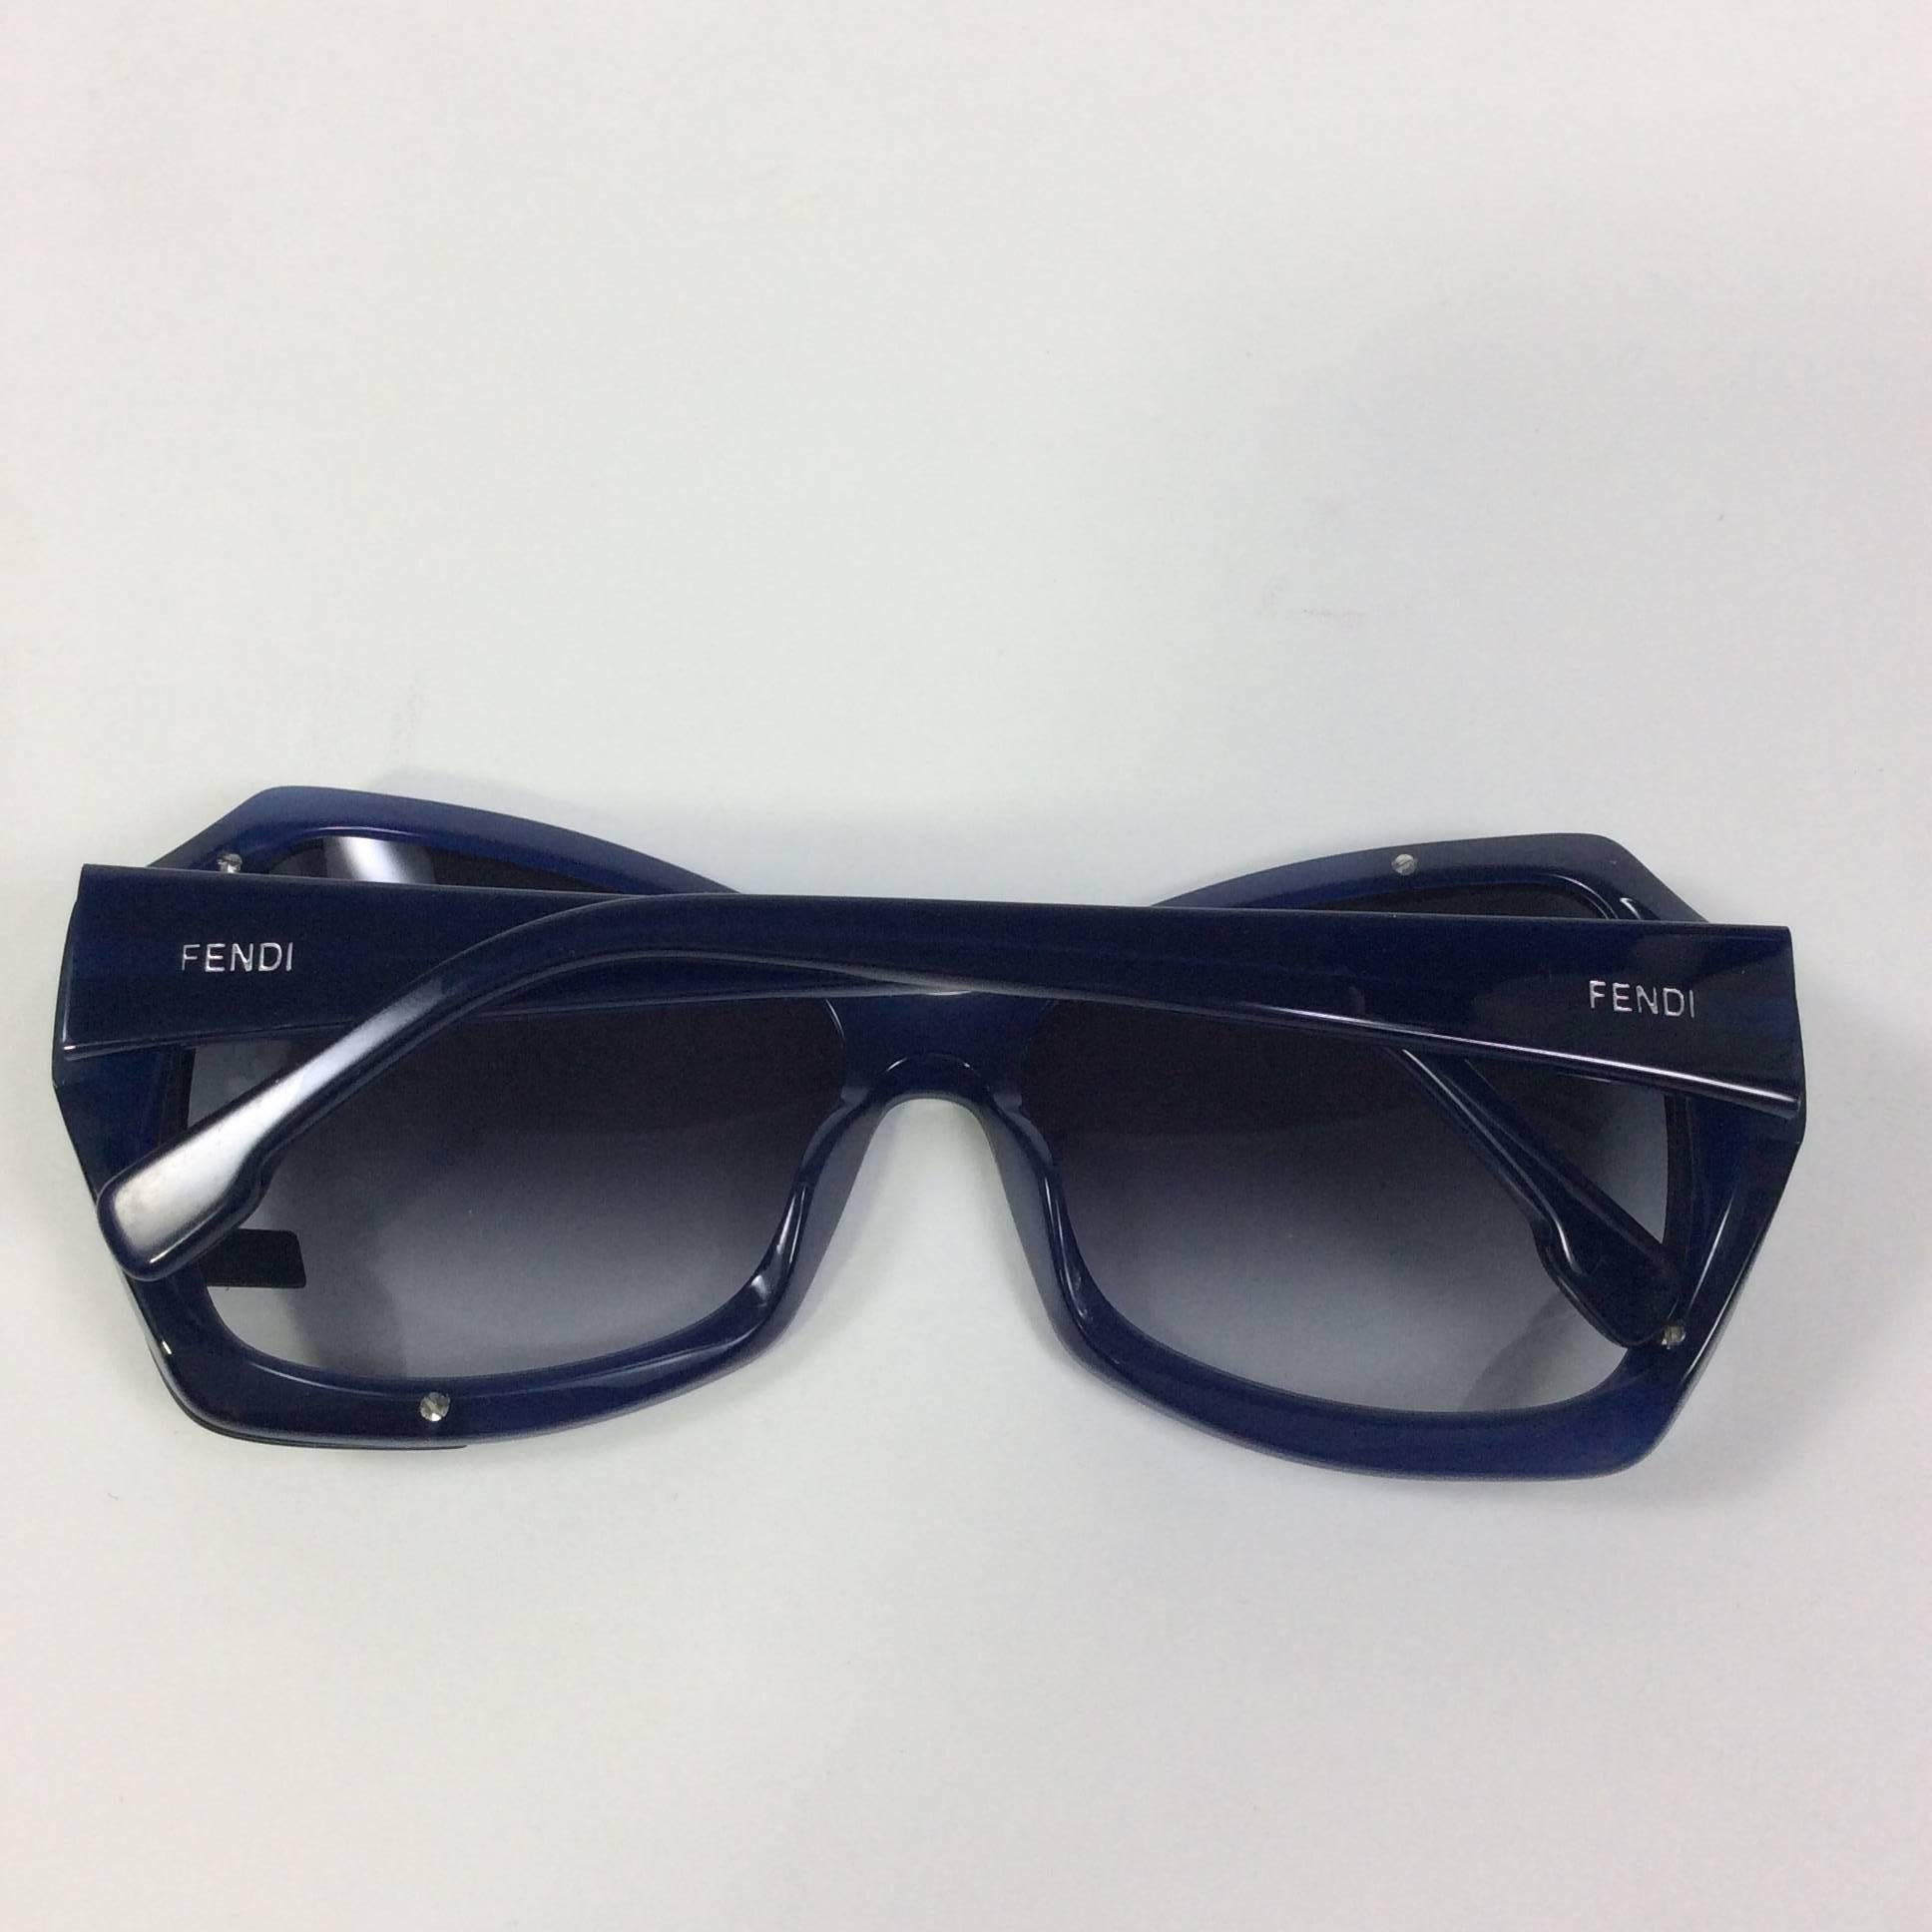 Fendi Blue Tinted Sunglasses In Excellent Condition For Sale In Narberth, PA